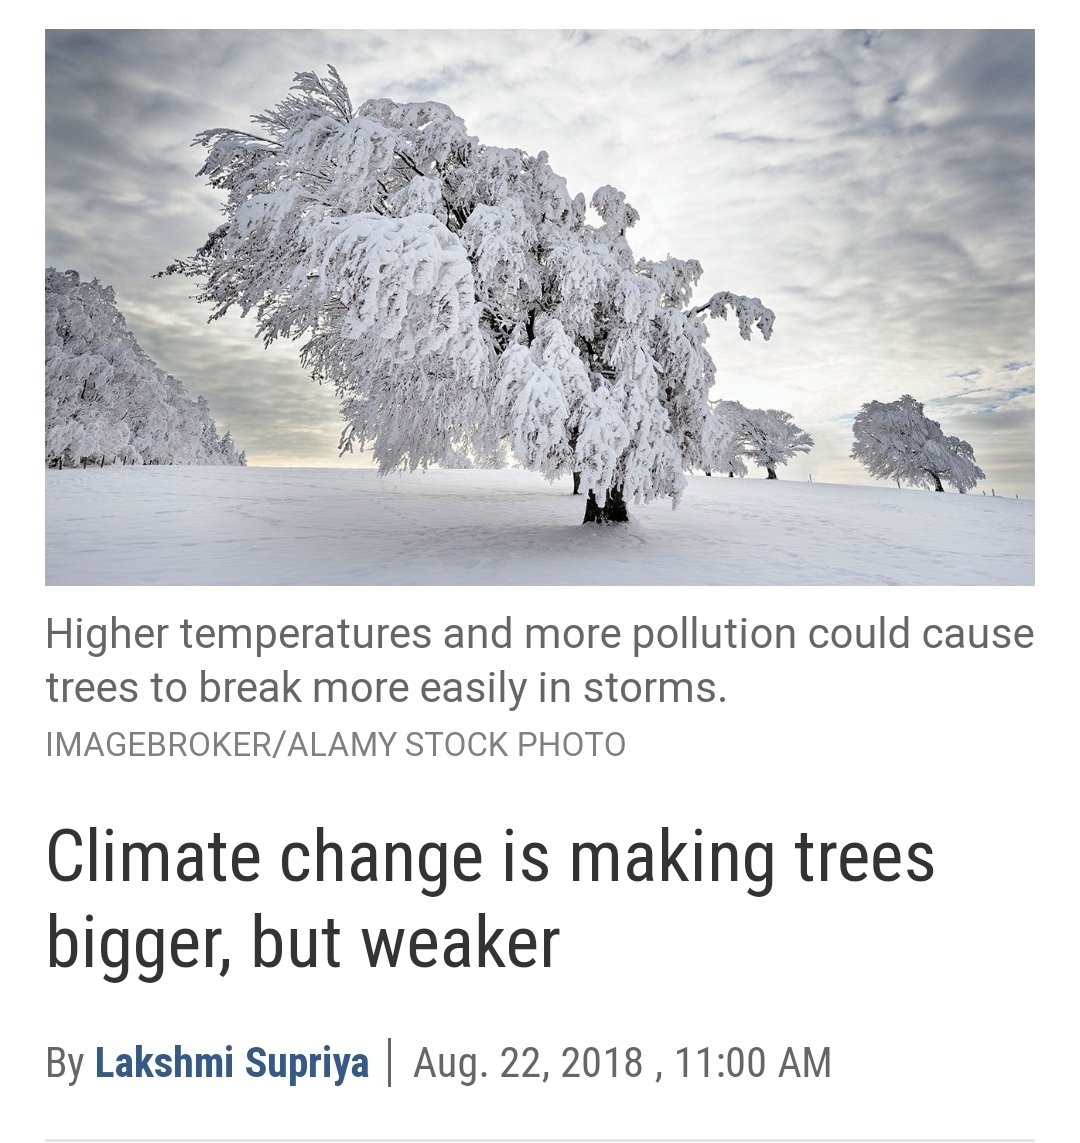 Climate change science in a nutshell. A meta thread. #climatechange  #ClimateAction    #climatebrawlClimate change is making trees bigger and shorter.